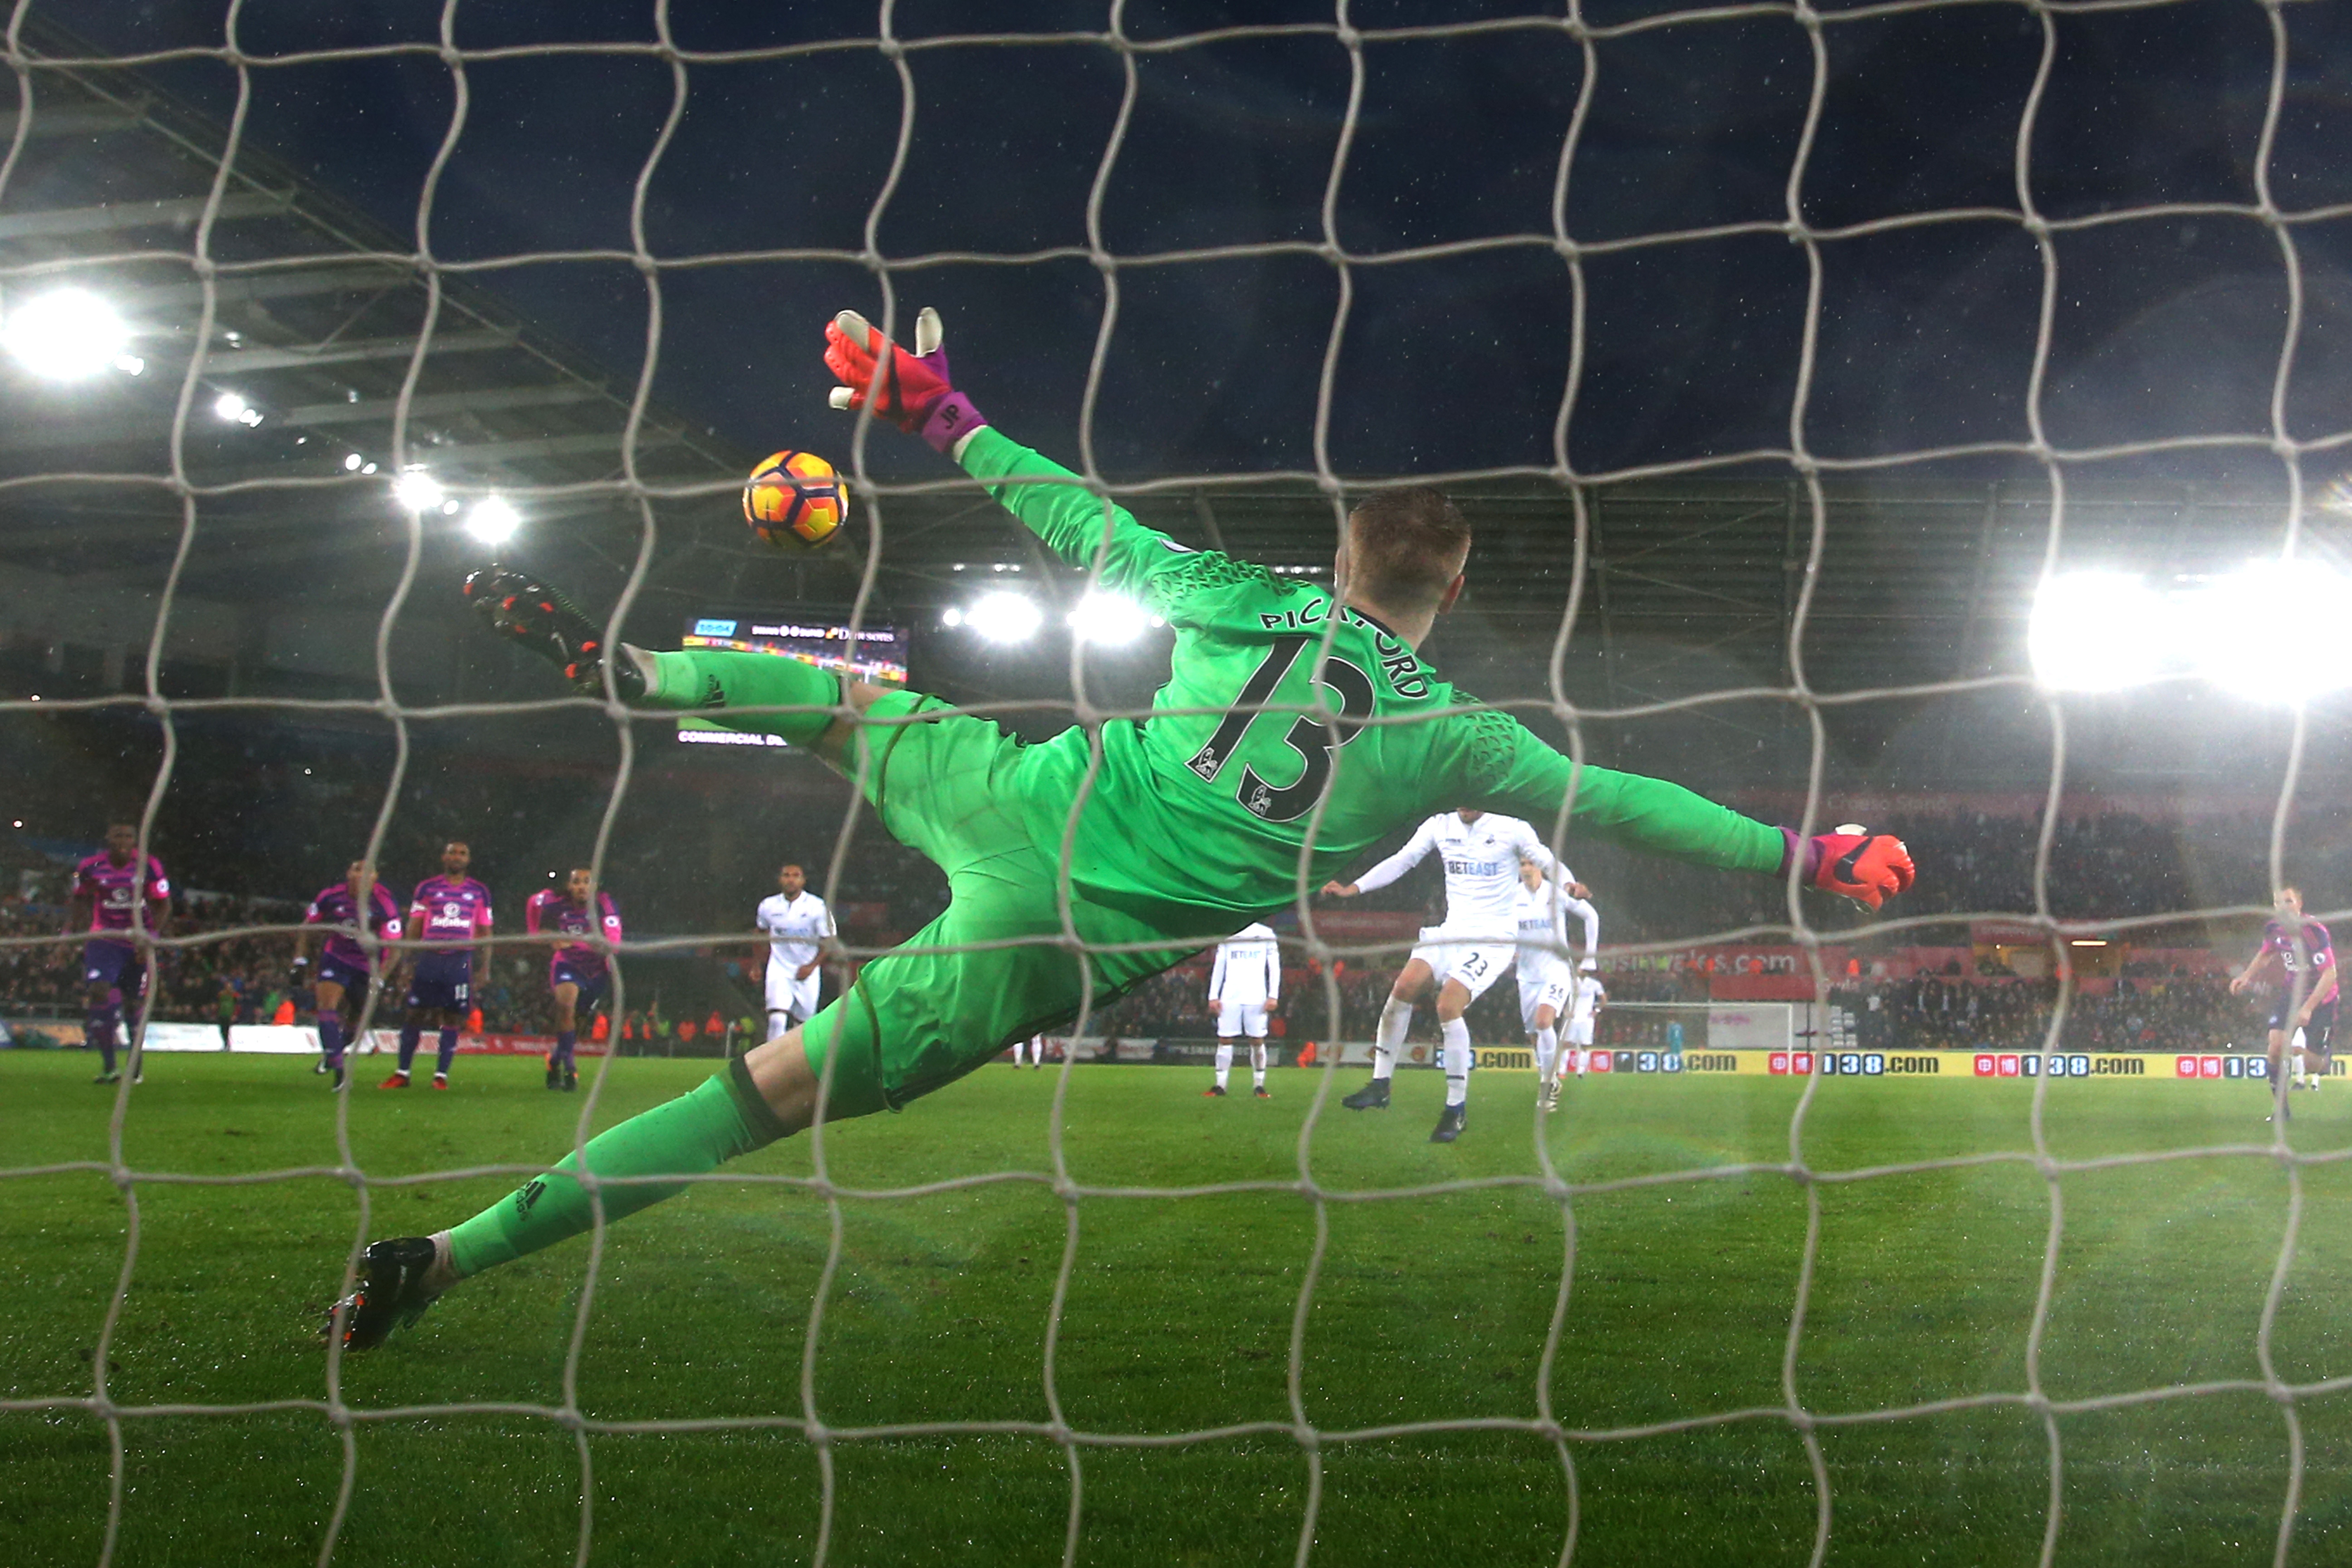 SWANSEA, WALES - DECEMBER 10: Gylfi Sigurdsson of Swansea City (C/obsure) scores his sides first goal past Jordan Pickford of Sunderland (C) from the penalty spot during the Premier League match between Swansea City and Sunderland at the Liberty Stadium on December 10, 2016 in Swansea, Wales.  (Photo by Michael Steele/Getty Images)